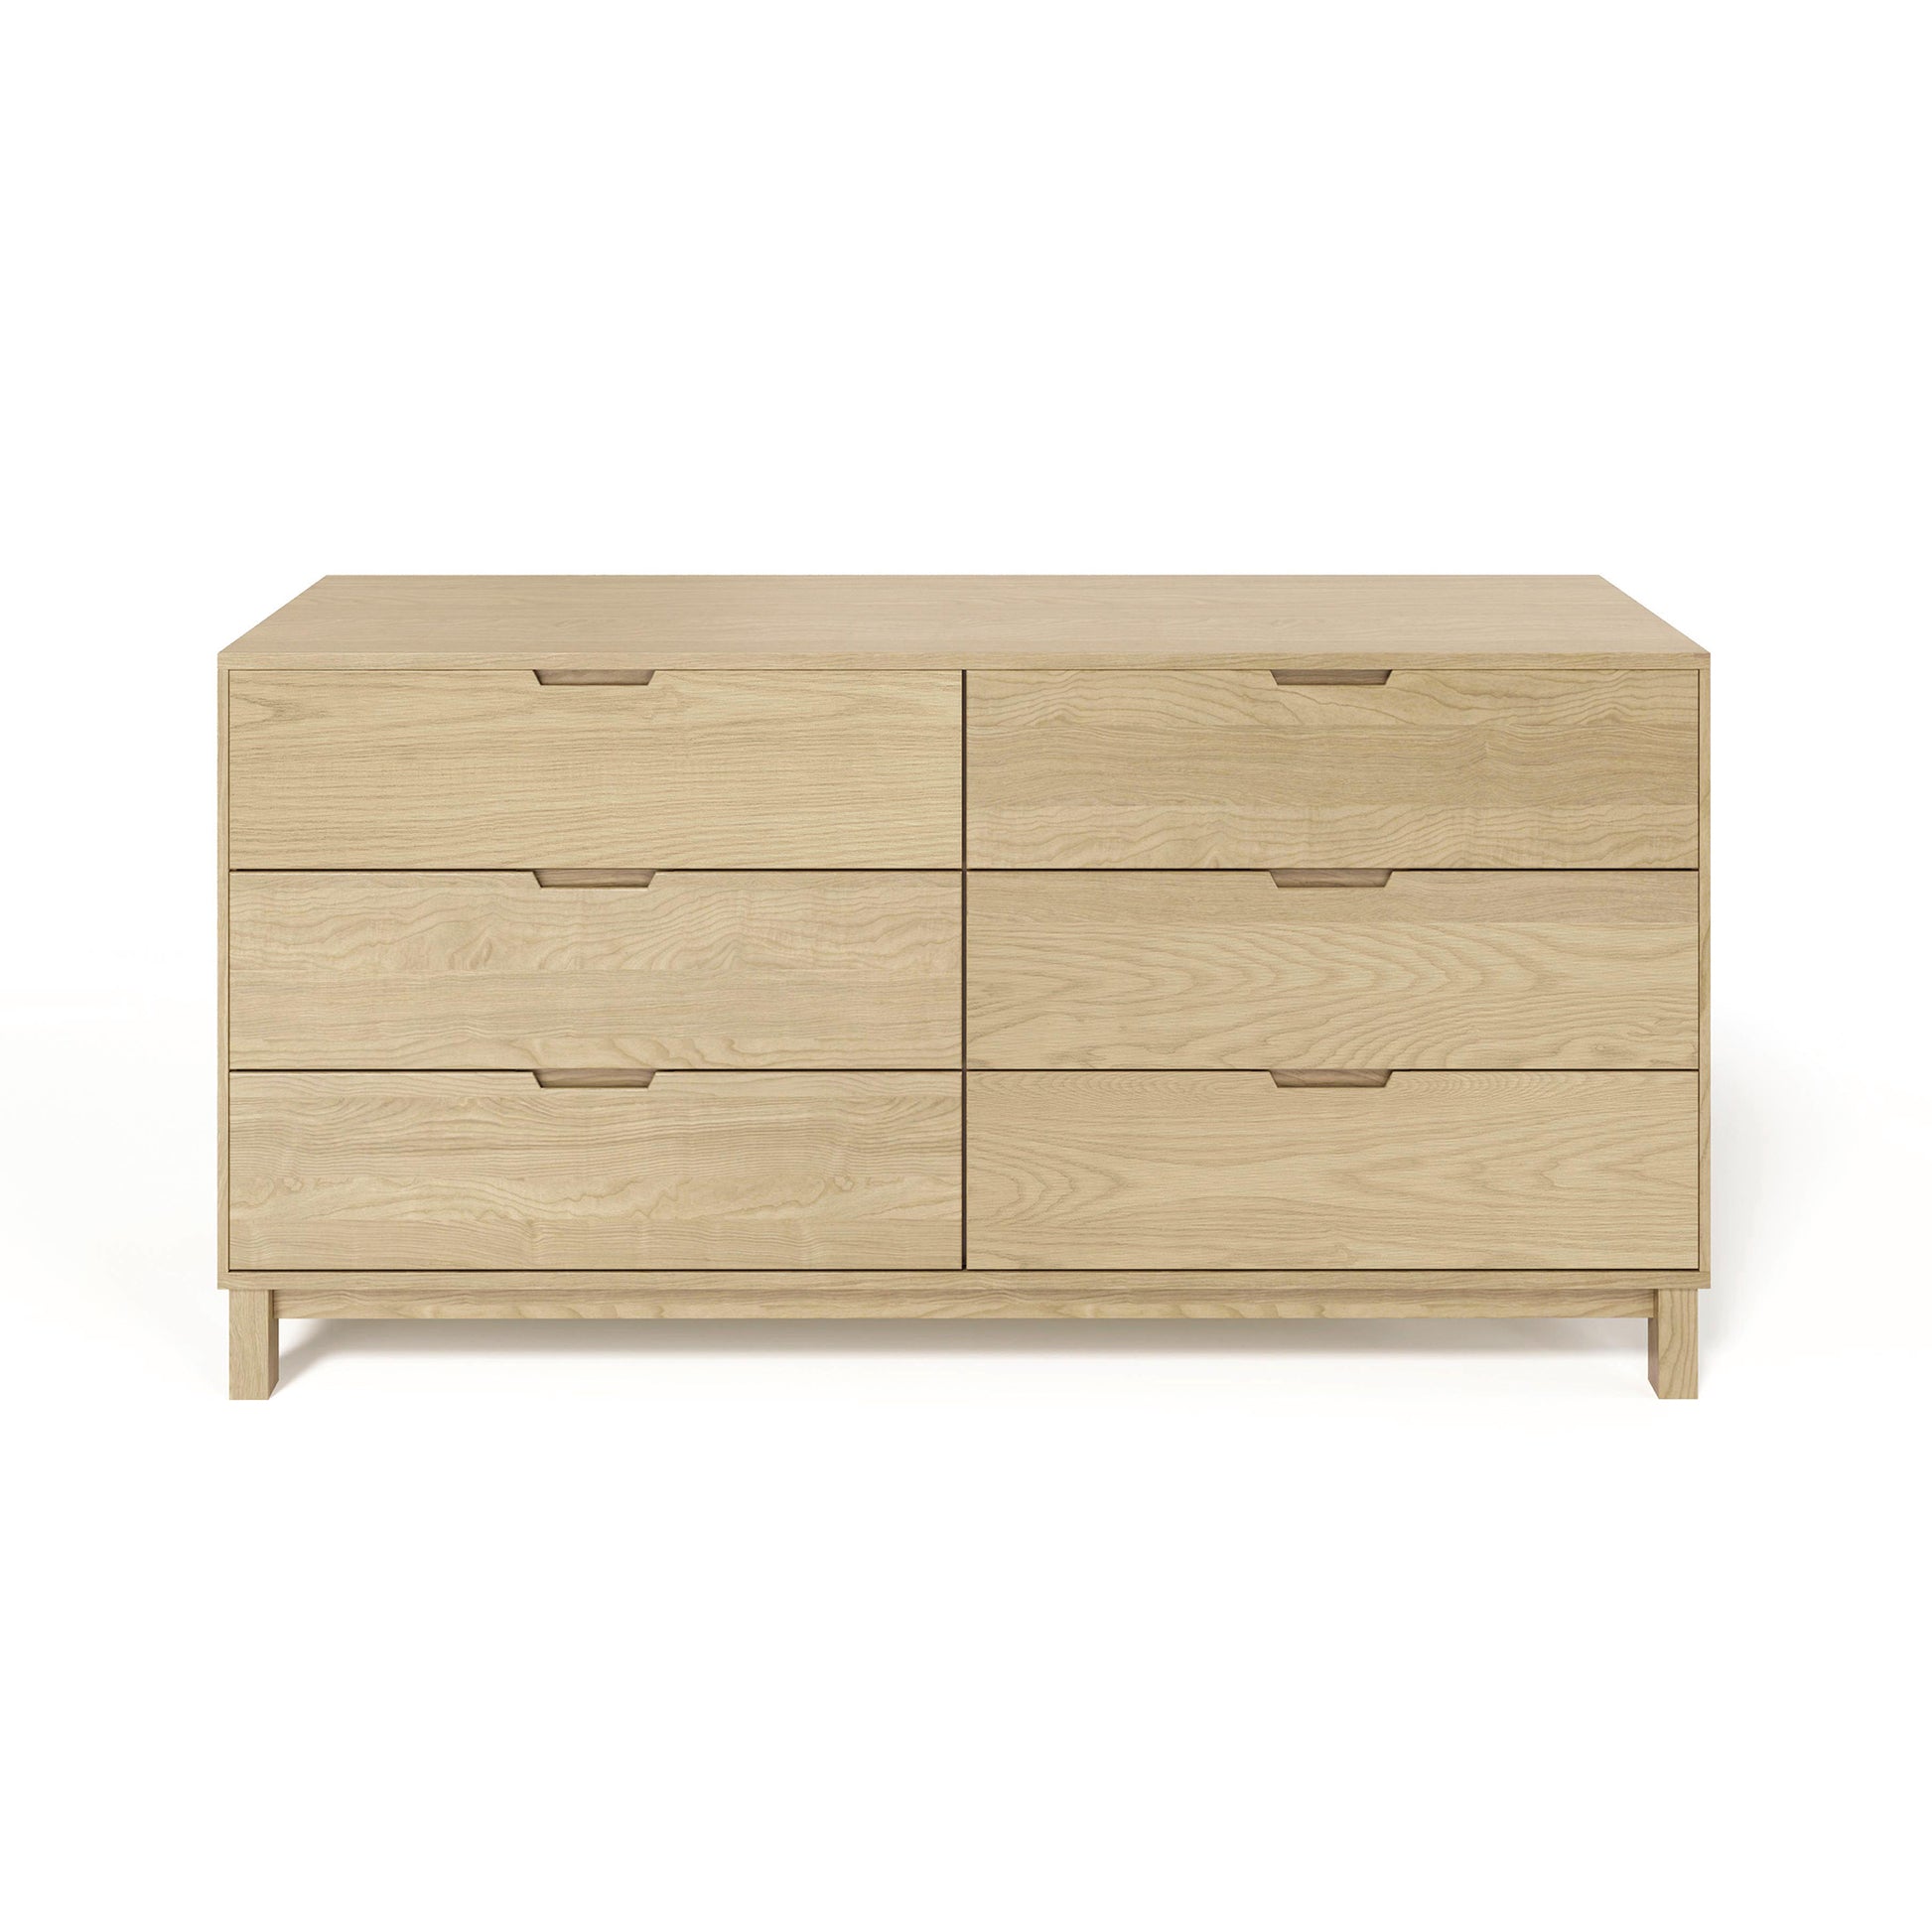 The Copeland Furniture Oslo 6-Drawer Dresser is a functional piece of bedroom storage. Made from solid natural oak hardwood, this wooden dresser features multiple drawers for ample organization. Set against a clean white design, it adds a sleek and modern touch to any bedroom.